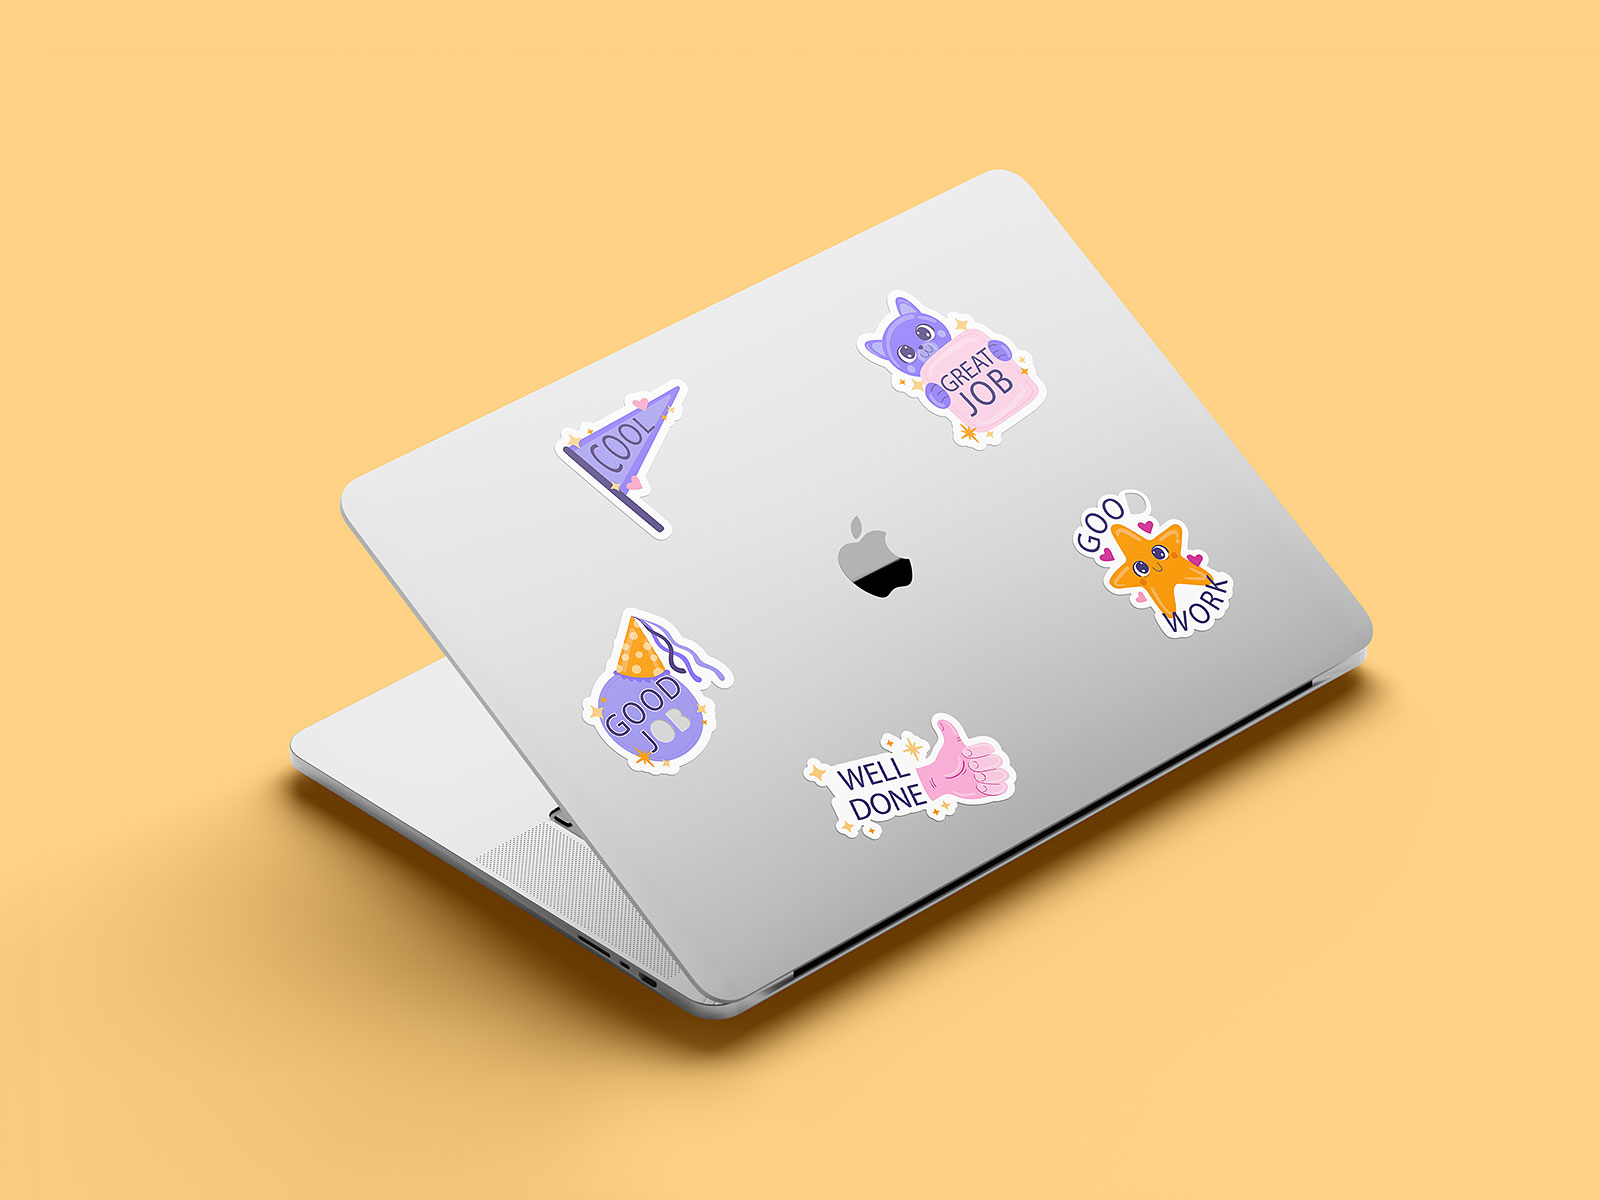 Aesthetic Laptop Sticker Mockup Set: Elevate Your Tech Vibe with Distinctive Designs!